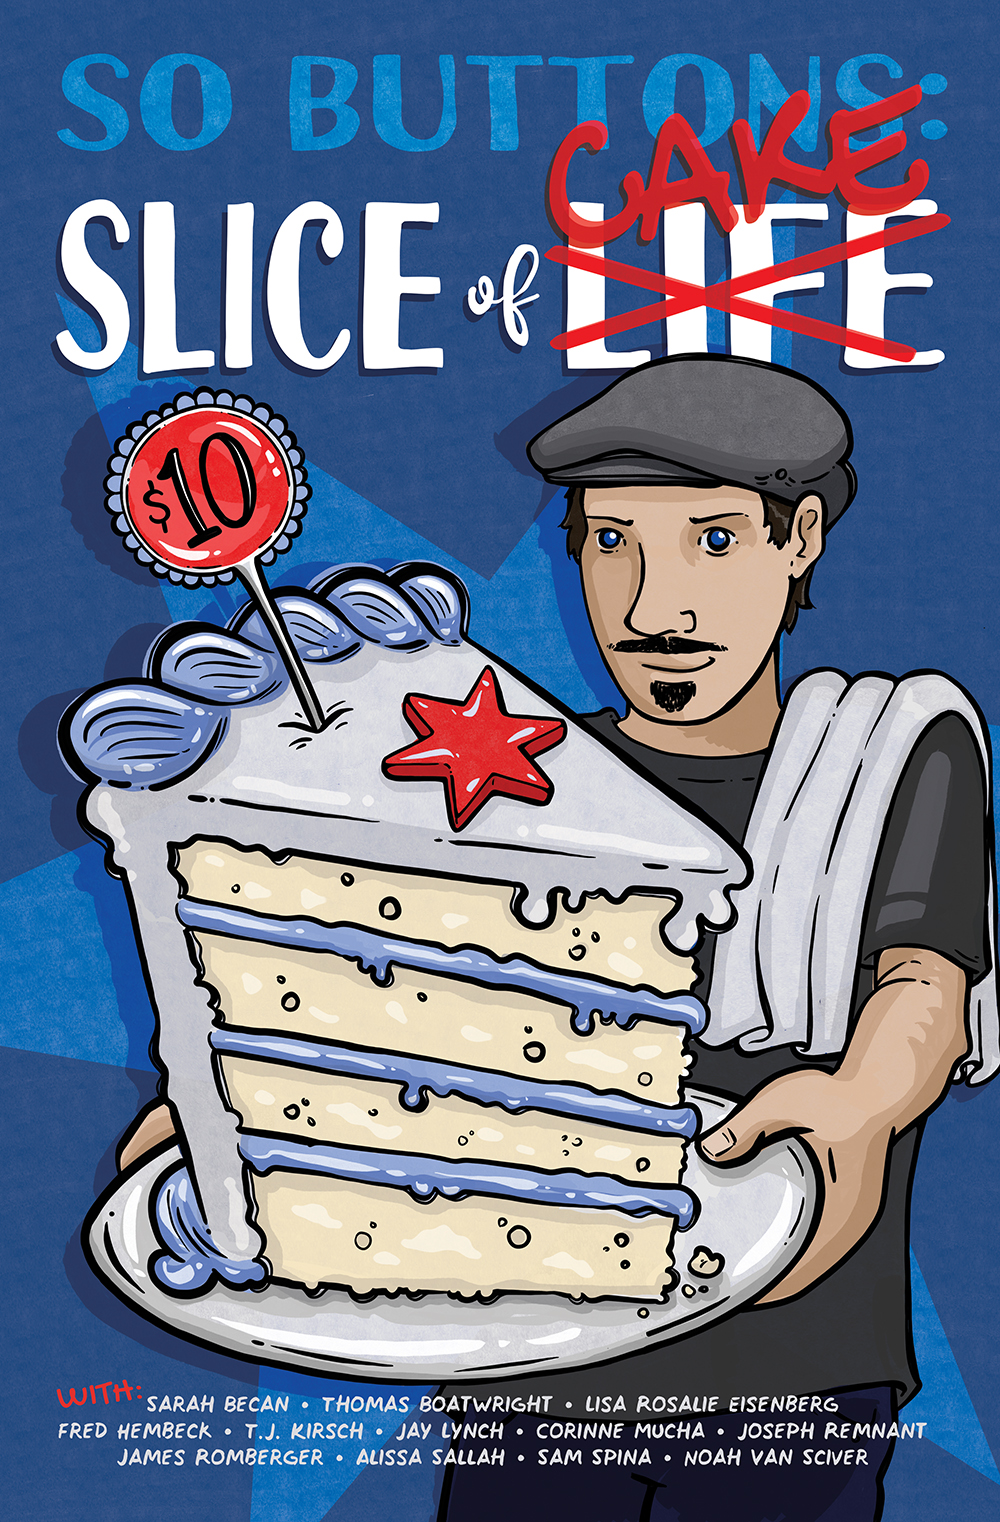 So Buttons: Slice of CAKE